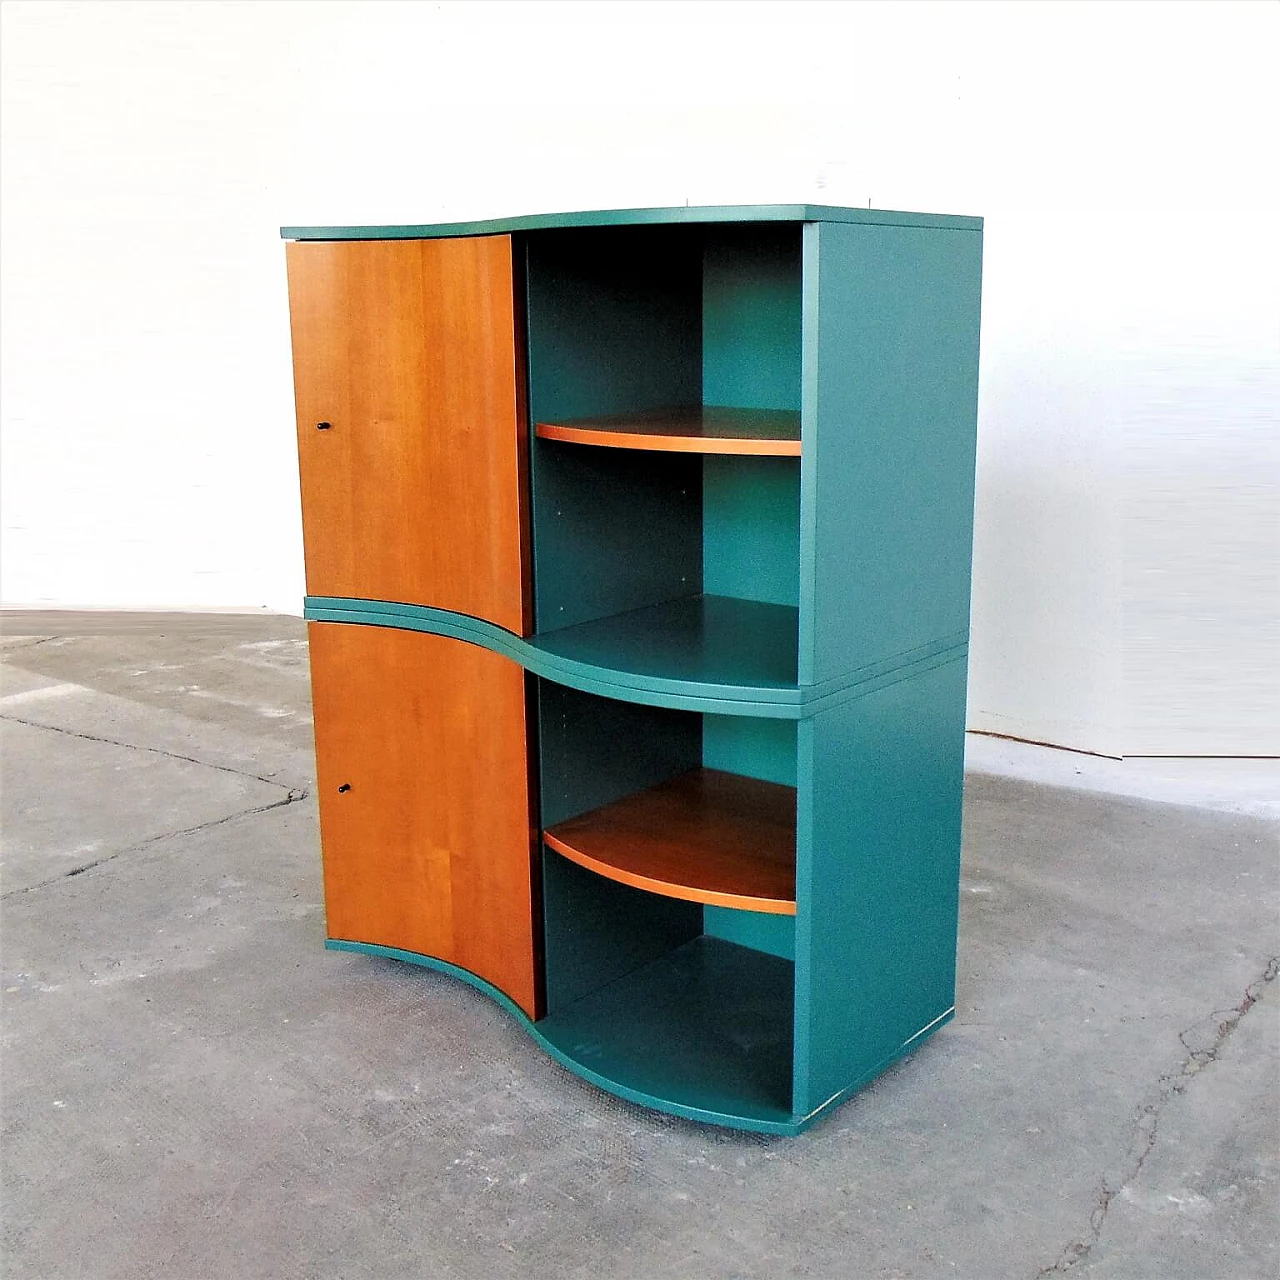 Sideboard Green Satin Lacquer, Doors in Walnut-Stained Cherry, for Roche Bobois, 1990s 1167293